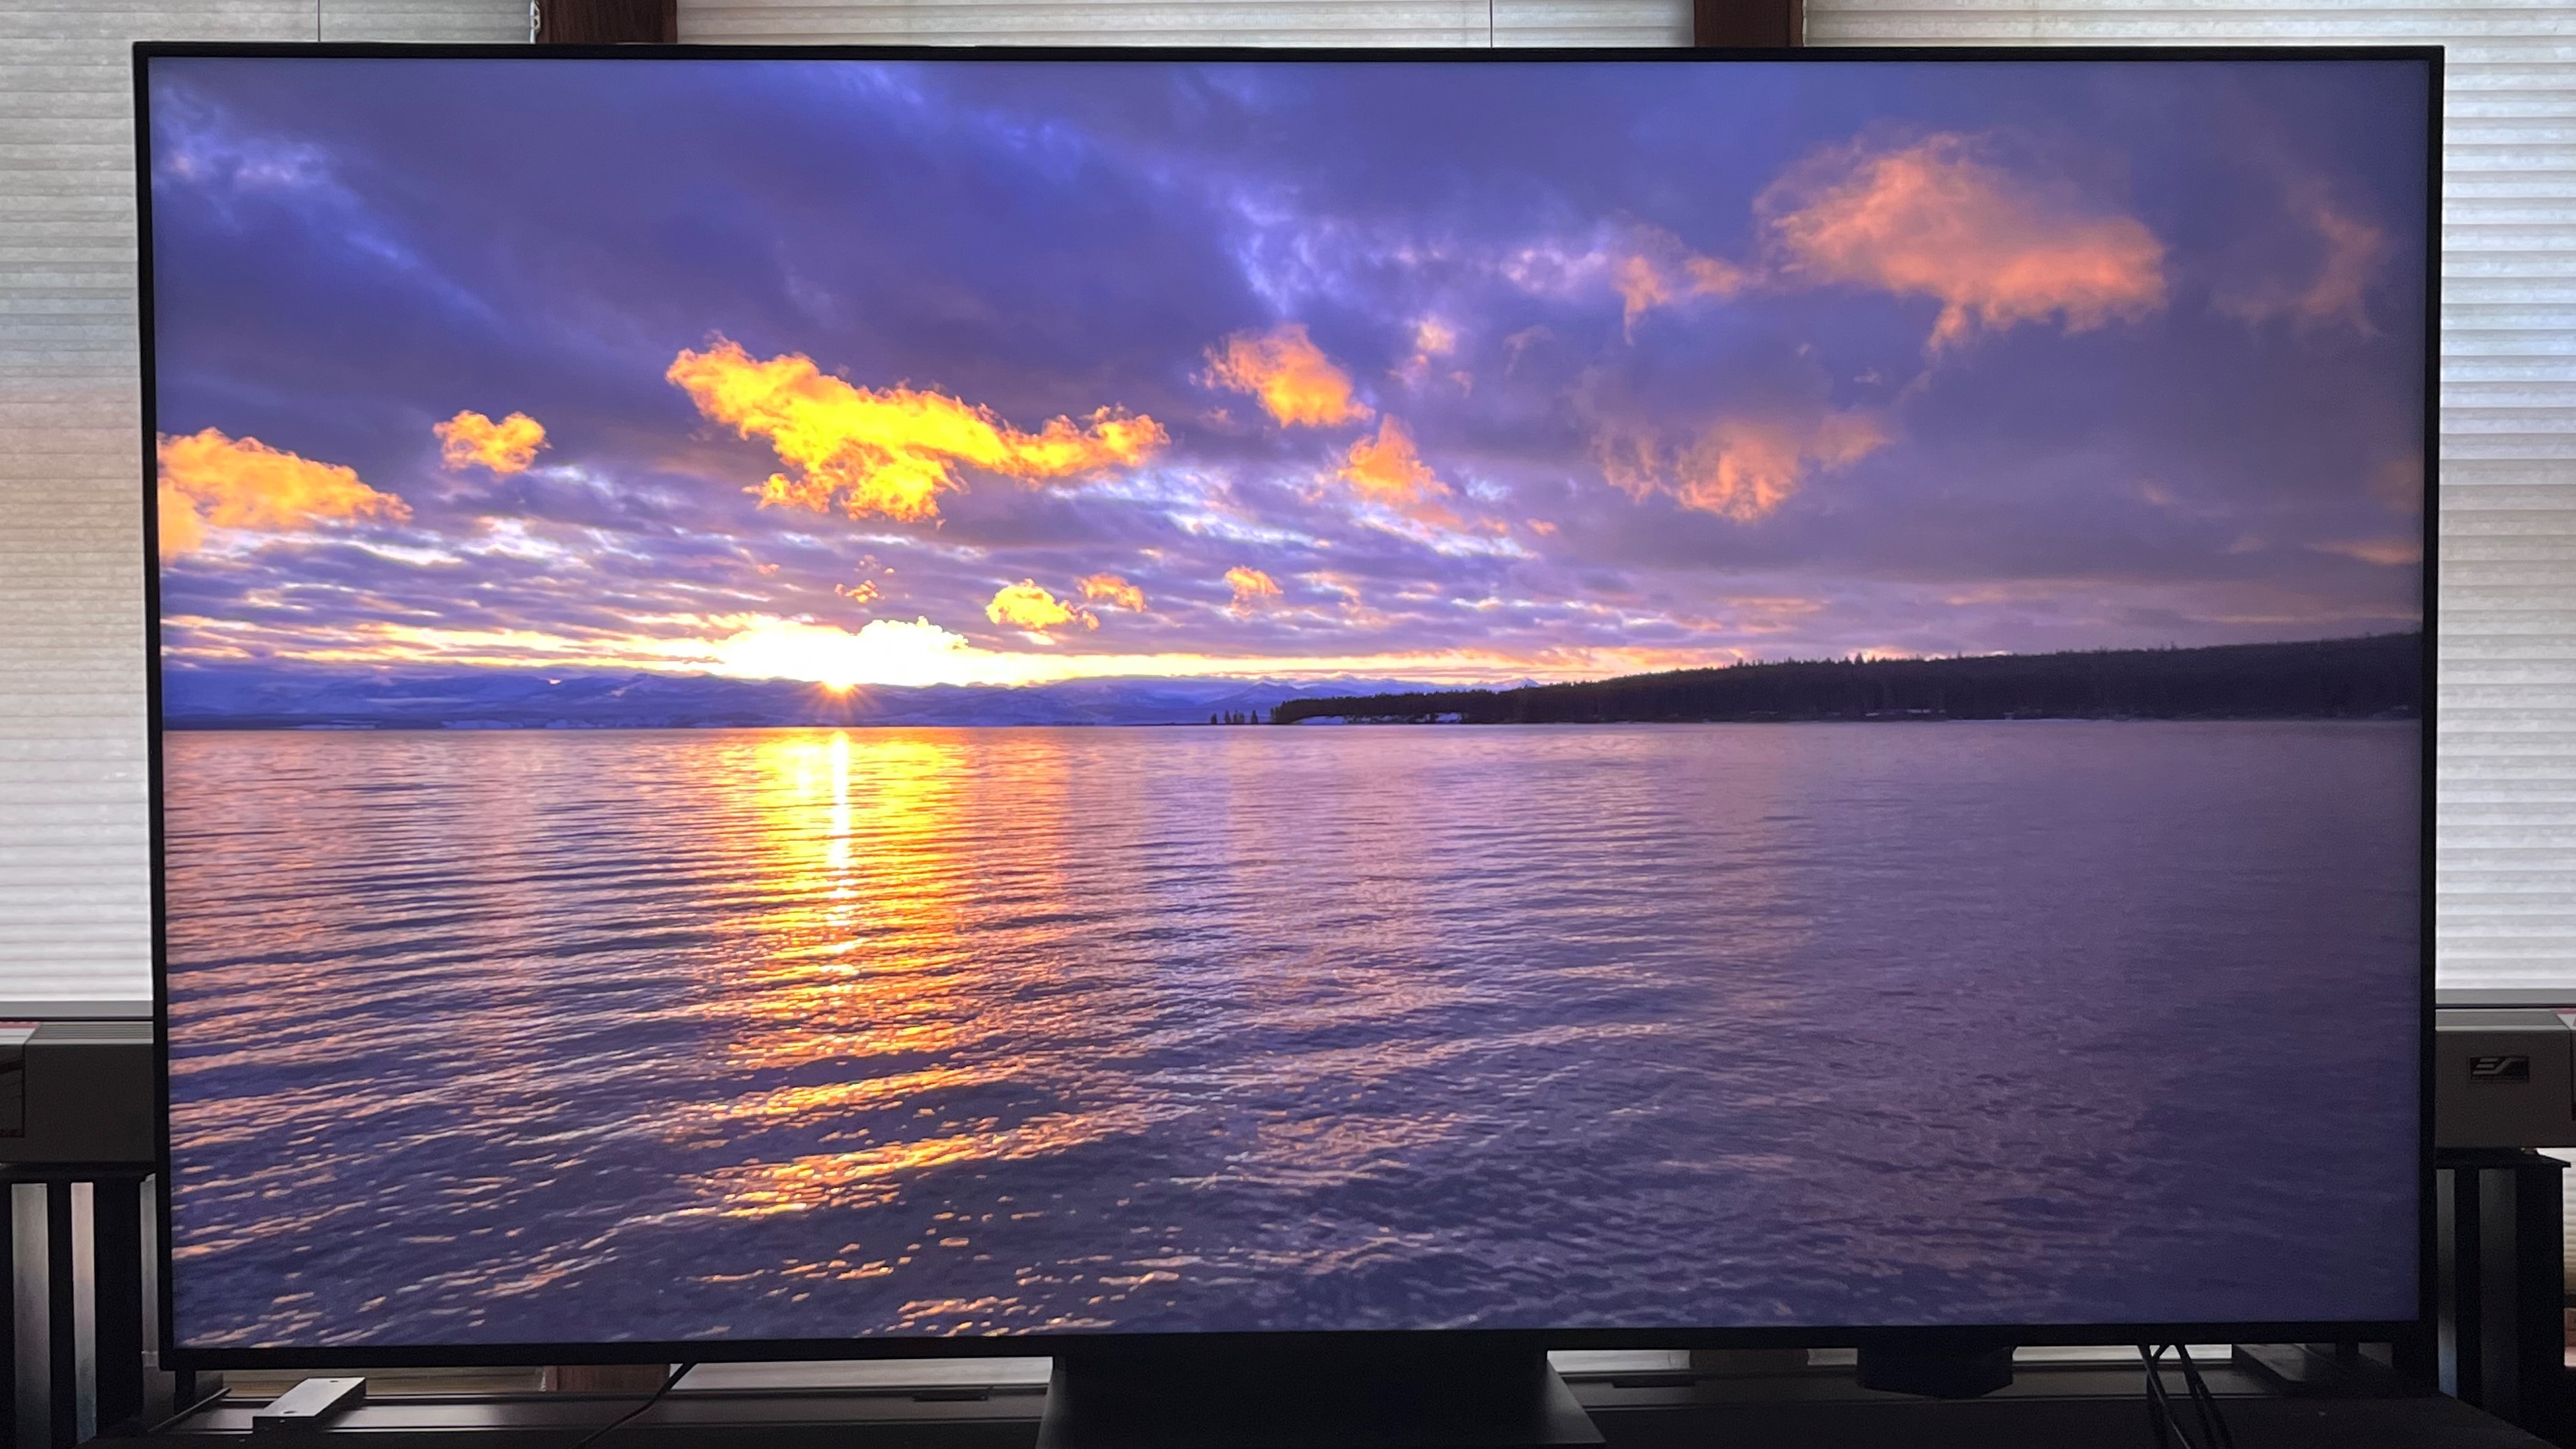 TCL QM8 showing image of sunset on water